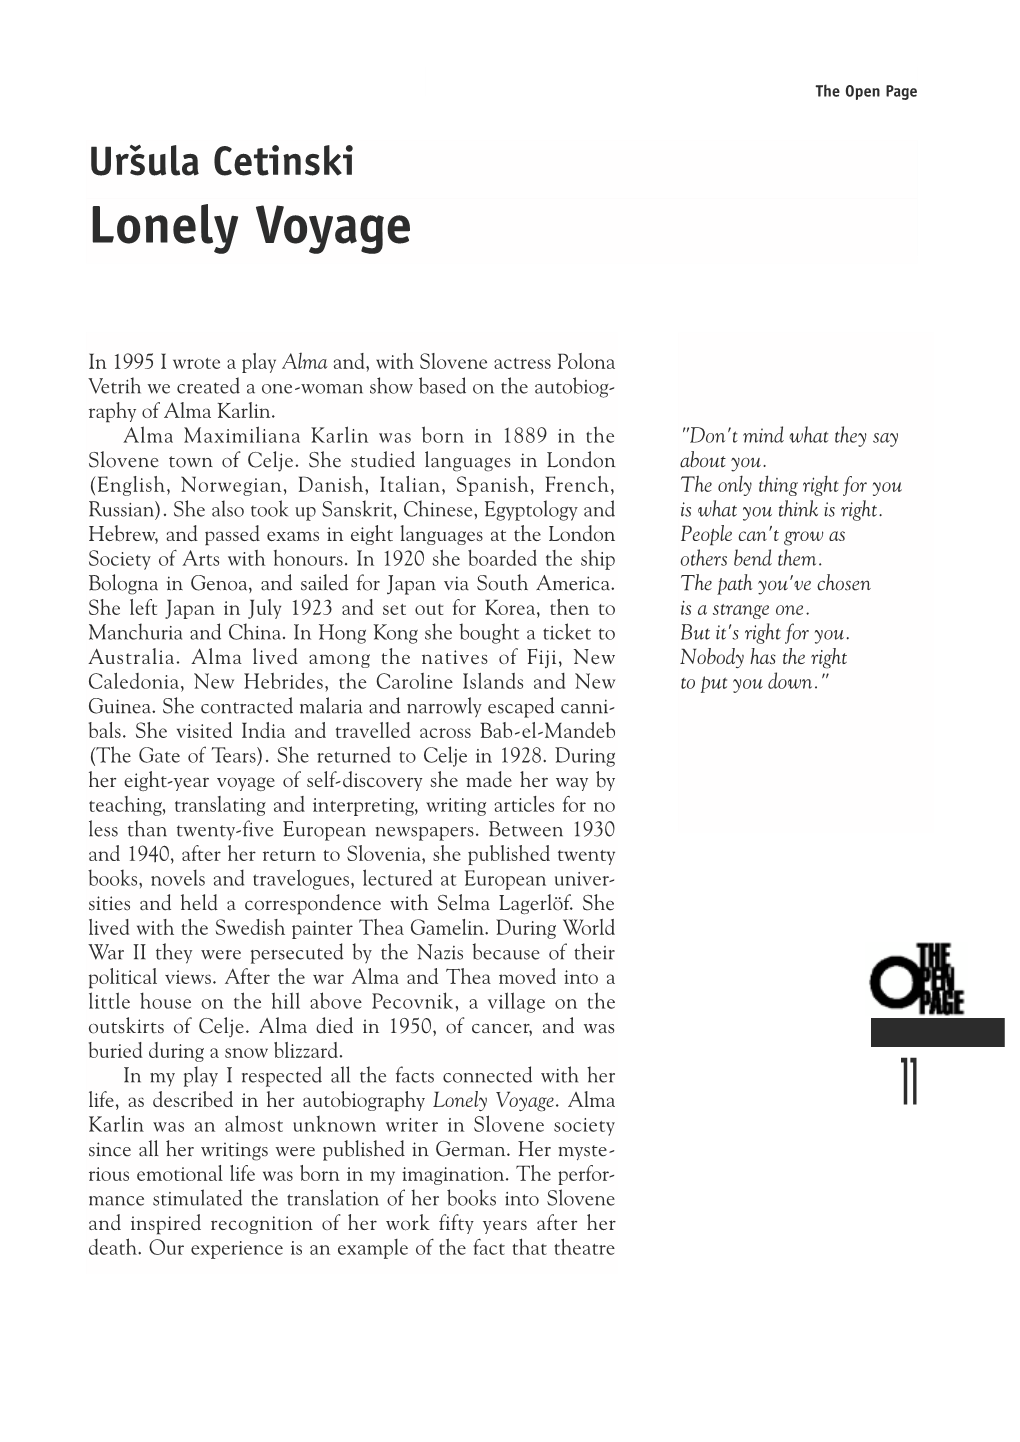 Lonely Voyage